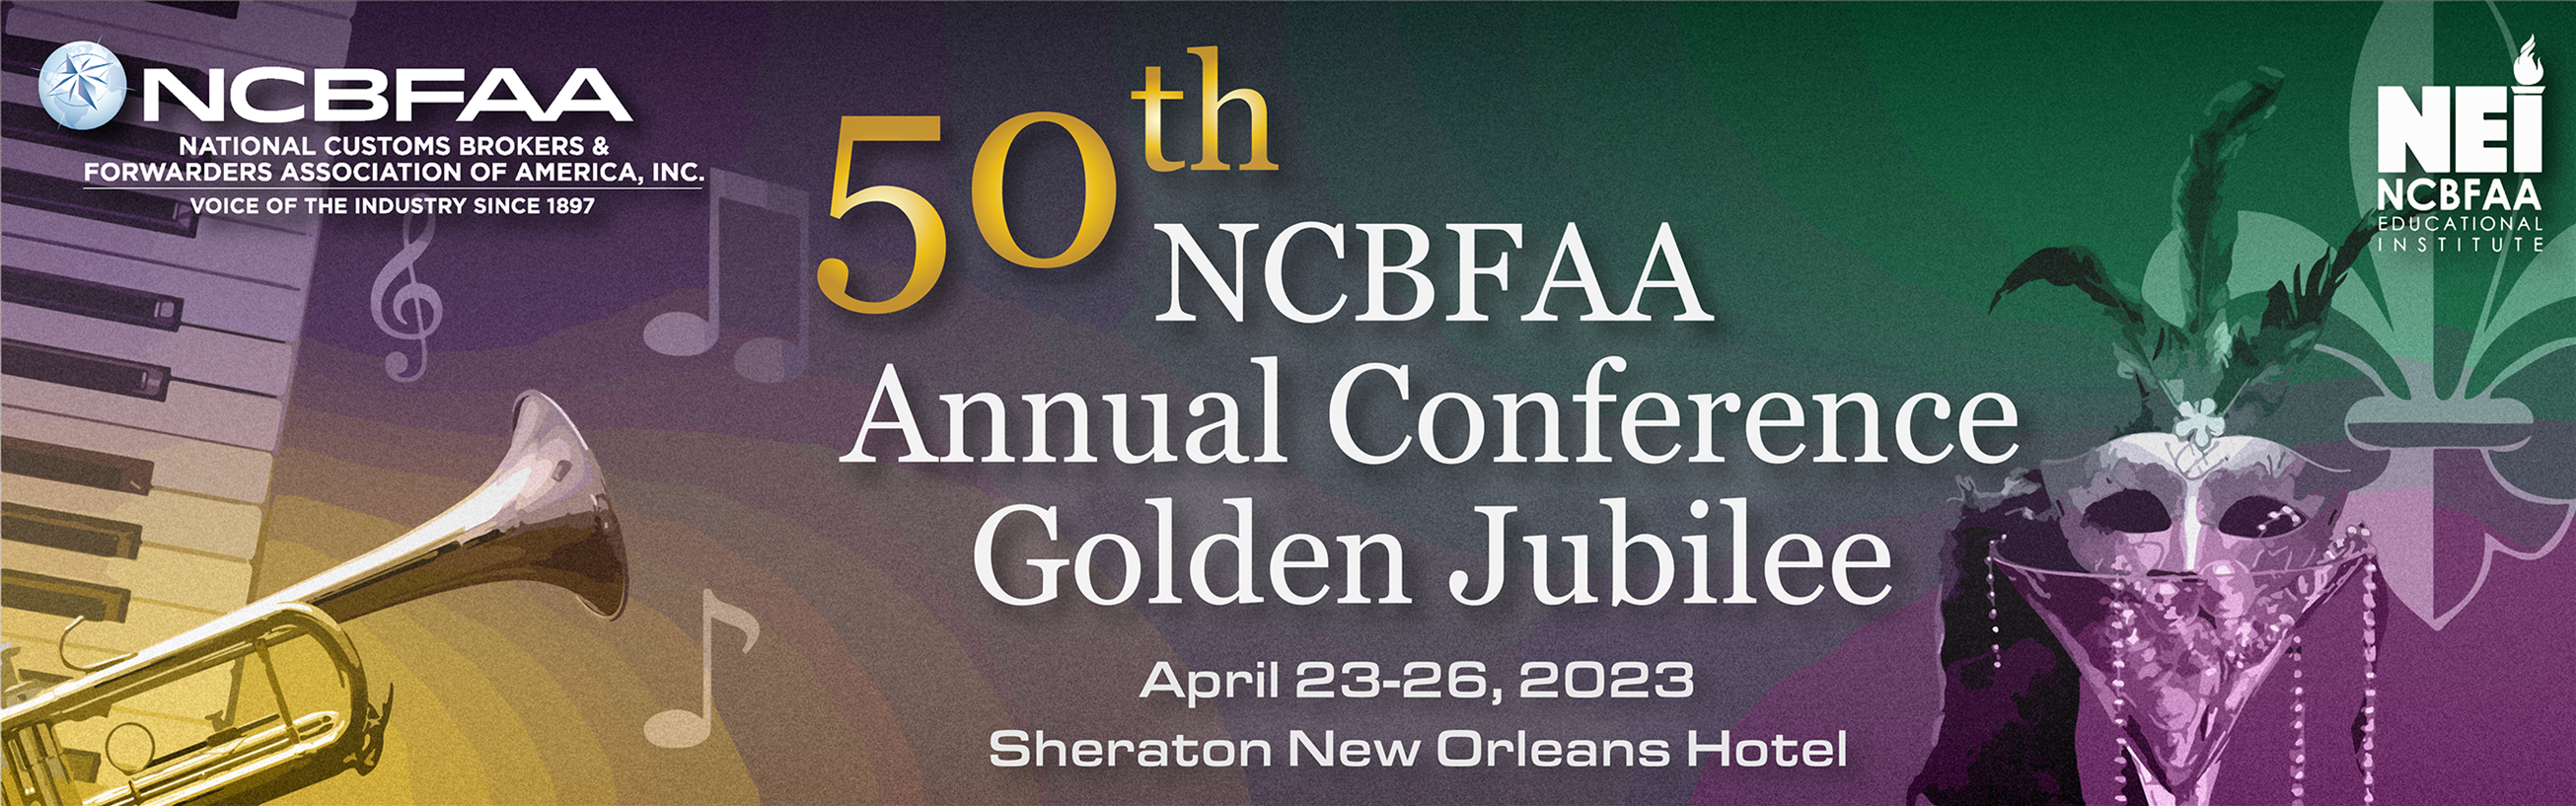 50th NCBFAA Annual Conference